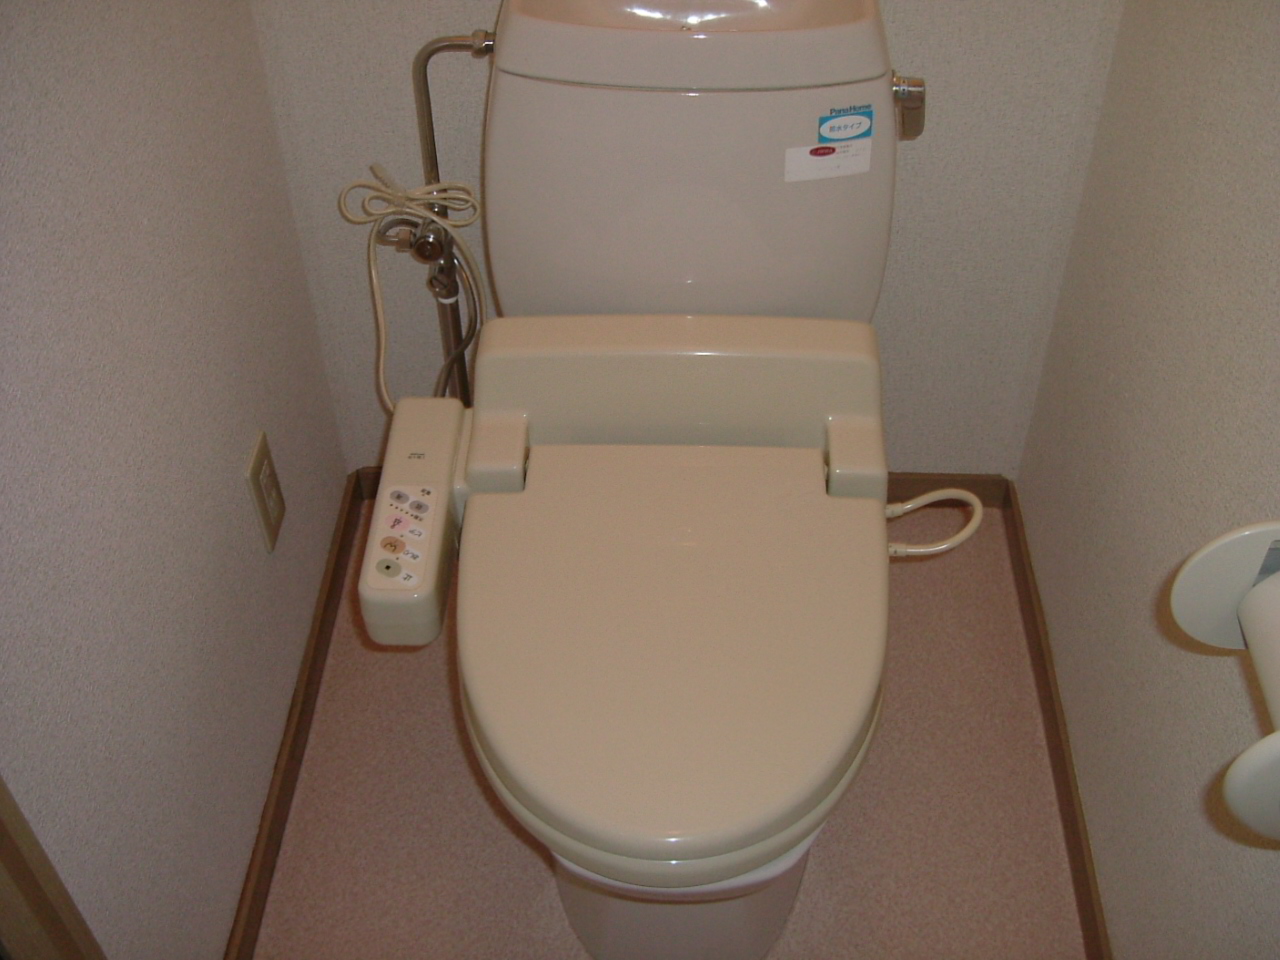 Toilet. Is a warm water washing toilet seat Installed.